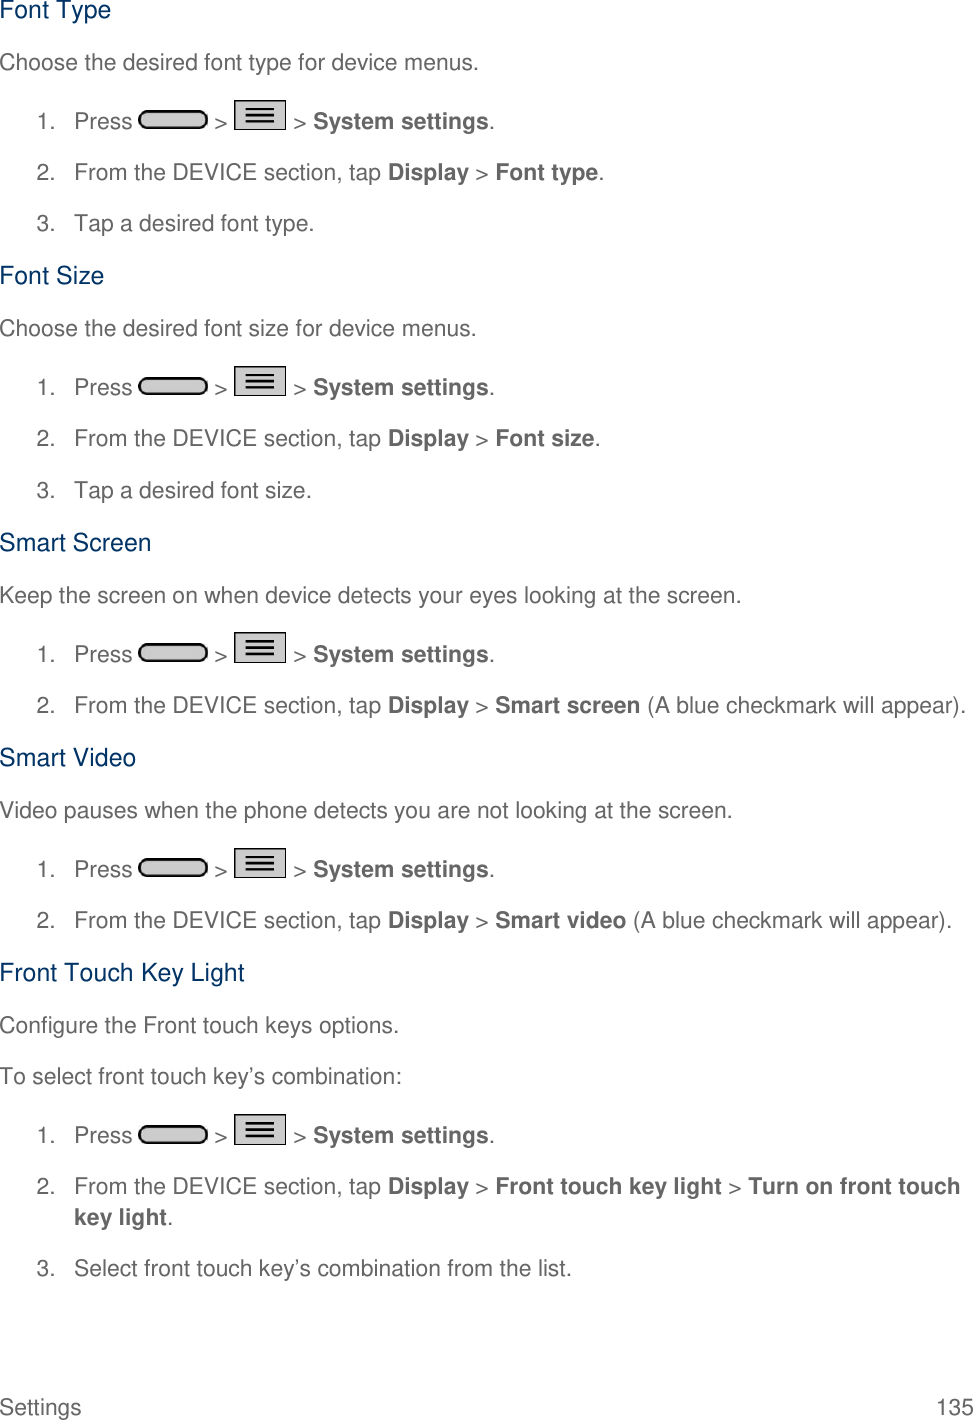 Settings  135 Font Type Choose the desired font type for device menus. 1.  Press   &gt;   &gt; System settings. 2.  From the DEVICE section, tap Display &gt; Font type. 3.  Tap a desired font type. Font Size Choose the desired font size for device menus. 1.  Press   &gt;   &gt; System settings. 2.  From the DEVICE section, tap Display &gt; Font size. 3.  Tap a desired font size. Smart Screen Keep the screen on when device detects your eyes looking at the screen. 1.  Press   &gt;   &gt; System settings. 2.  From the DEVICE section, tap Display &gt; Smart screen (A blue checkmark will appear). Smart Video Video pauses when the phone detects you are not looking at the screen. 1.  Press   &gt;   &gt; System settings. 2.  From the DEVICE section, tap Display &gt; Smart video (A blue checkmark will appear). Front Touch Key Light Configure the Front touch keys options. To select front touch key‘s combination: 1.  Press   &gt;   &gt; System settings. 2.  From the DEVICE section, tap Display &gt; Front touch key light &gt; Turn on front touch key light. 3.  Select front touch key‘s combination from the list. 